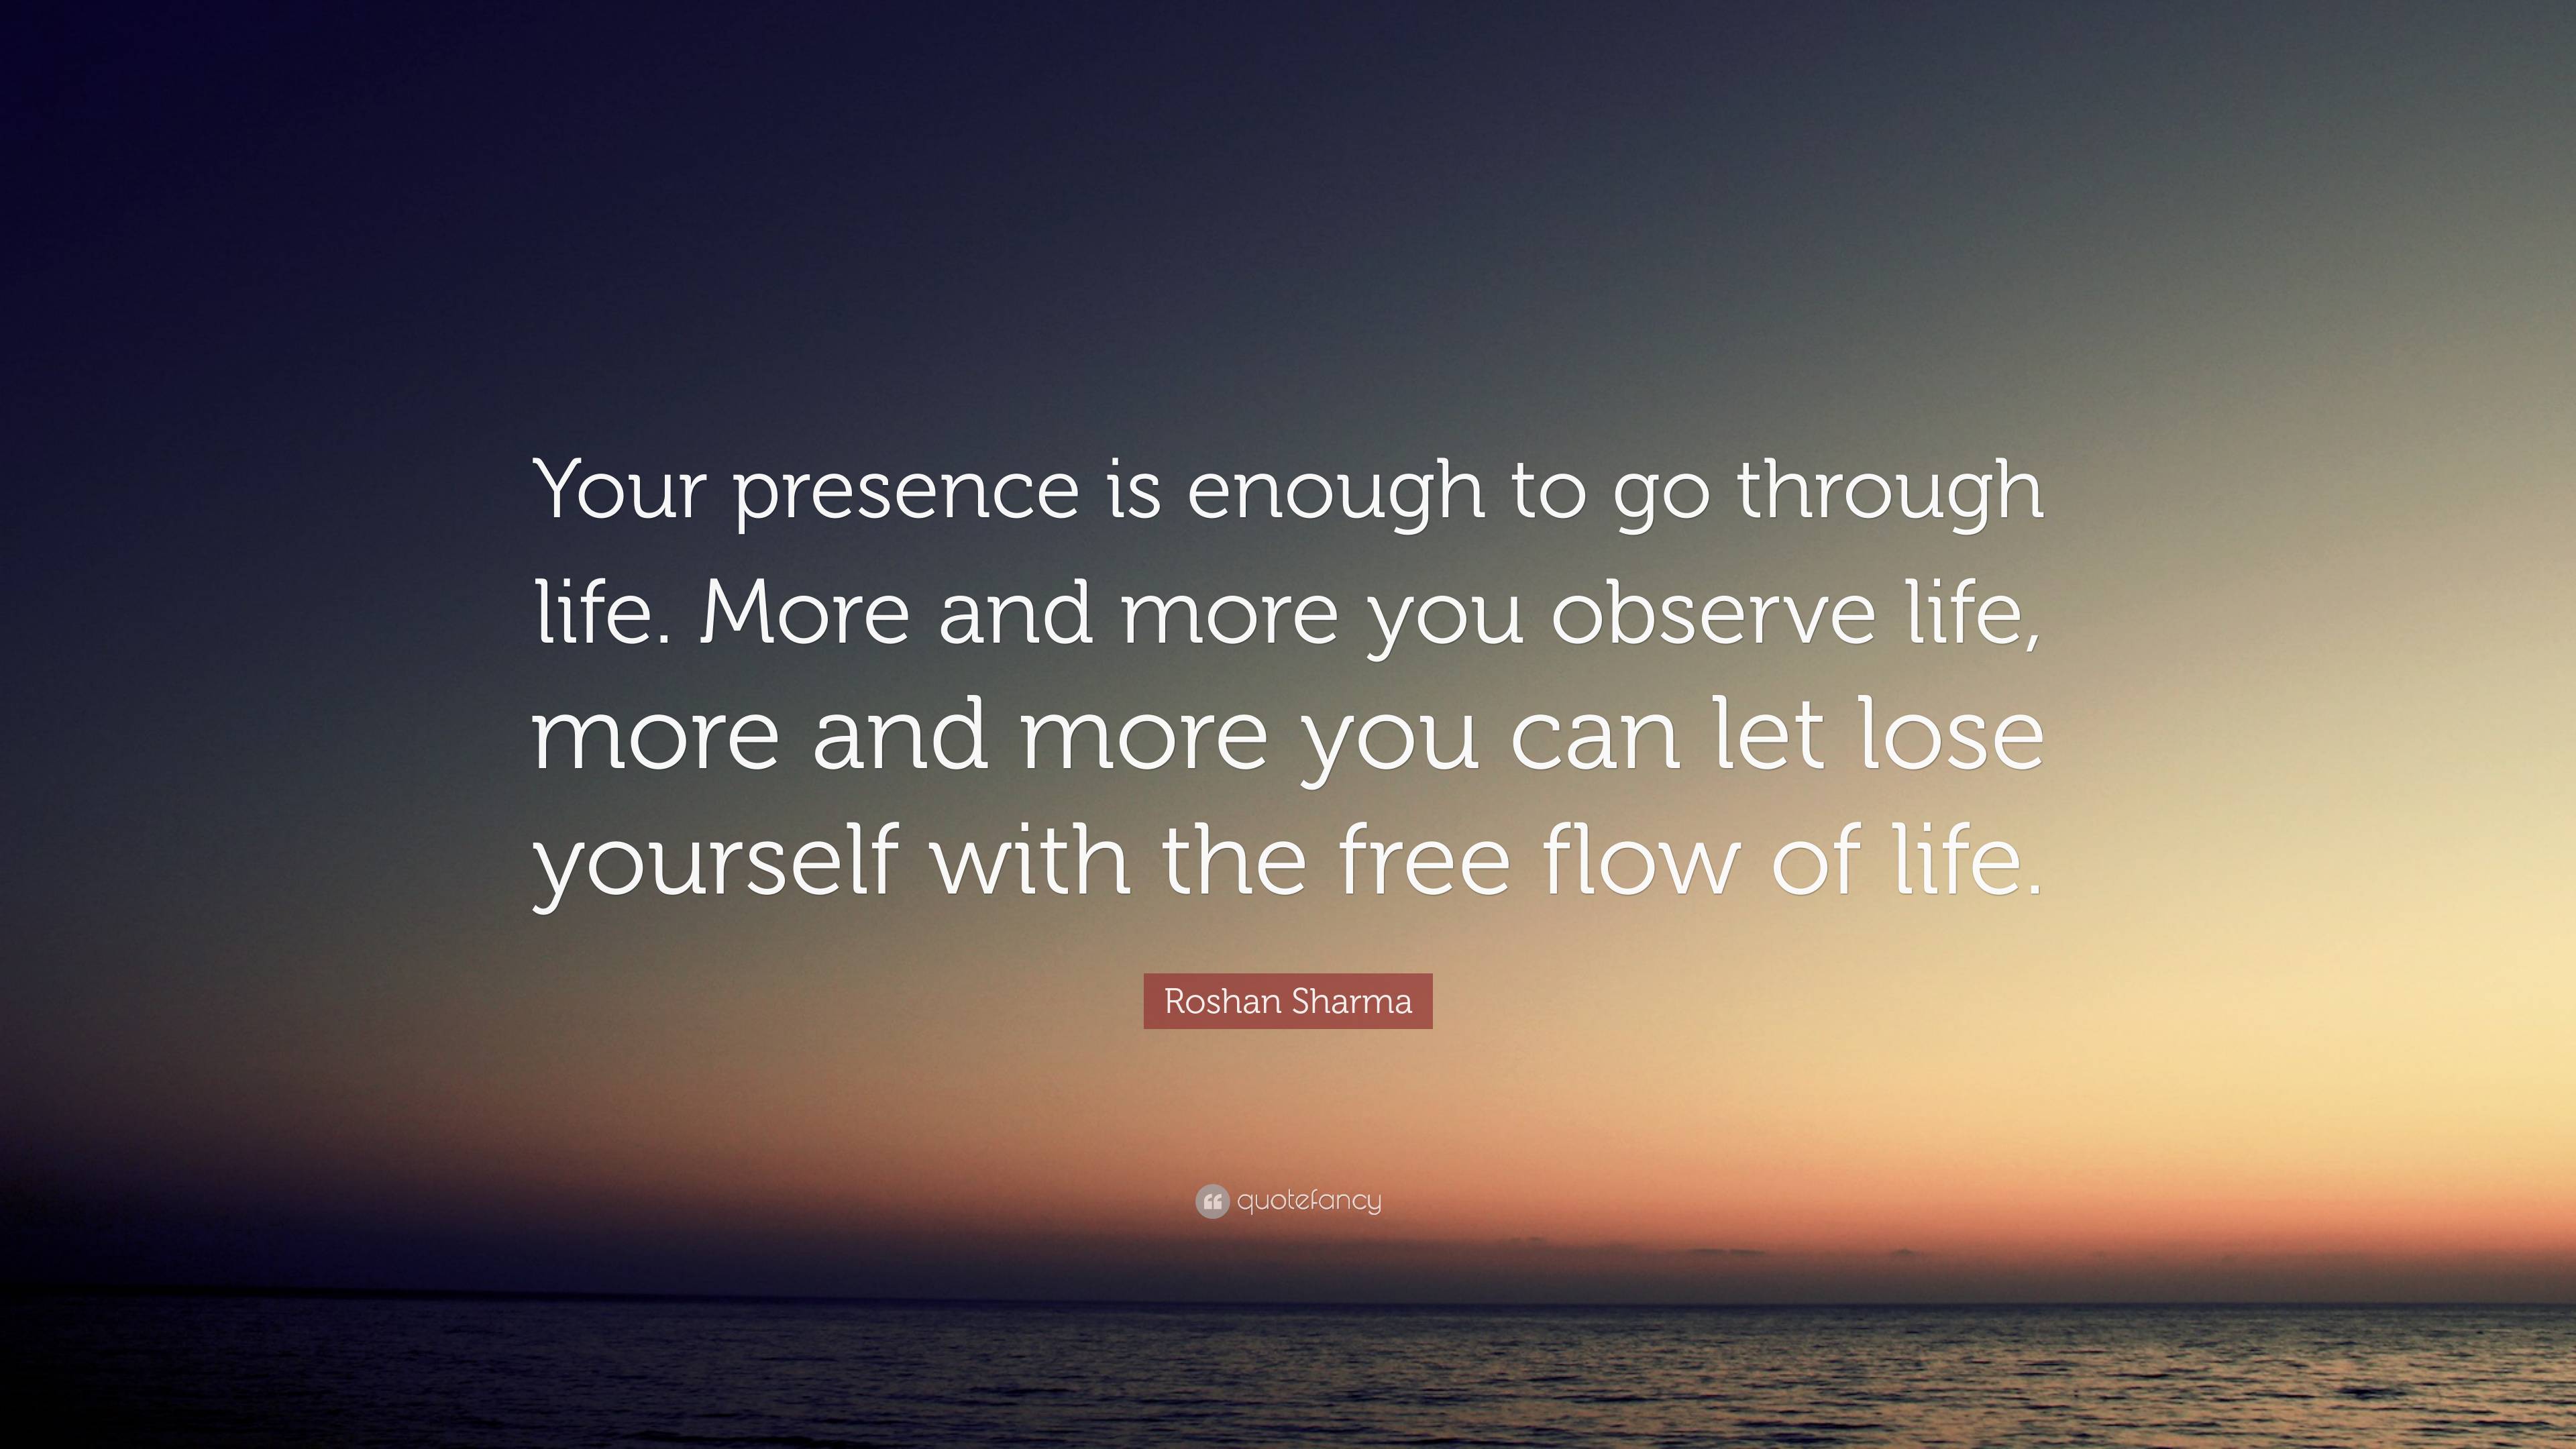 Roshan Sharma Quote: “Your presence is enough to go through life. More ...